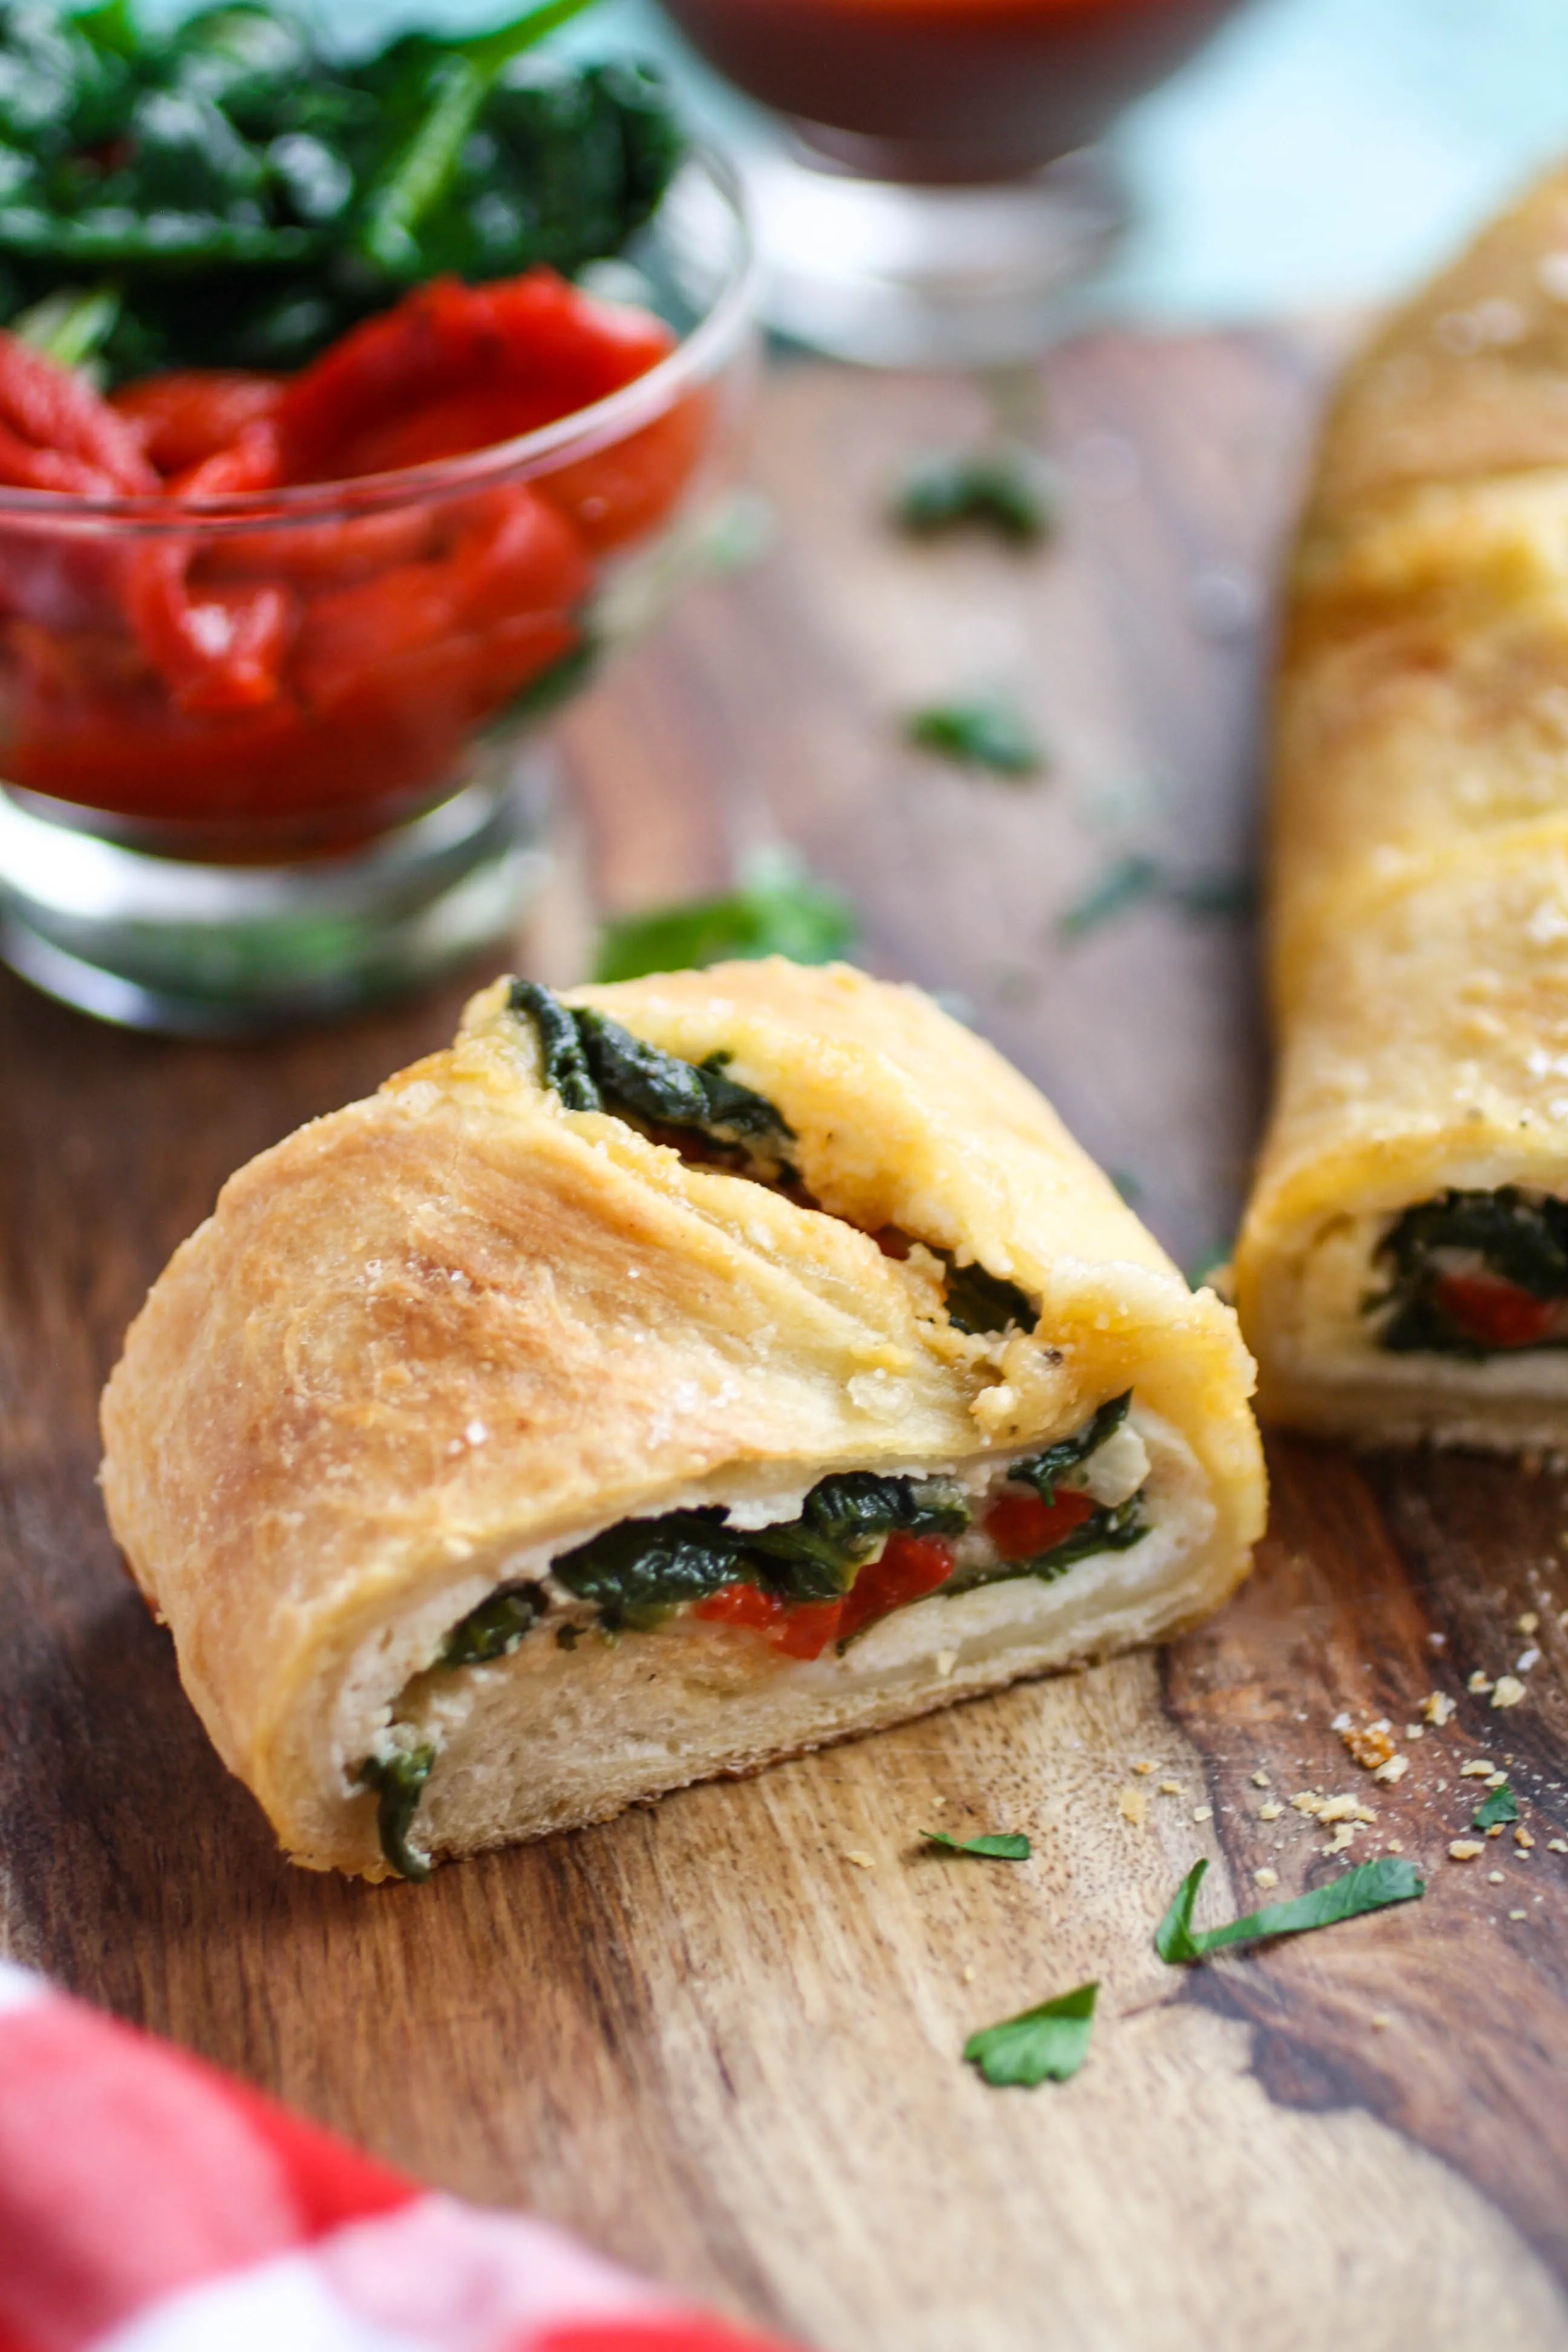 Spinach and Roasted Red Pepper Stromboli is a wonderful dish to serve any night of the week. Stromboli is like pizza, but rolled up and baked!